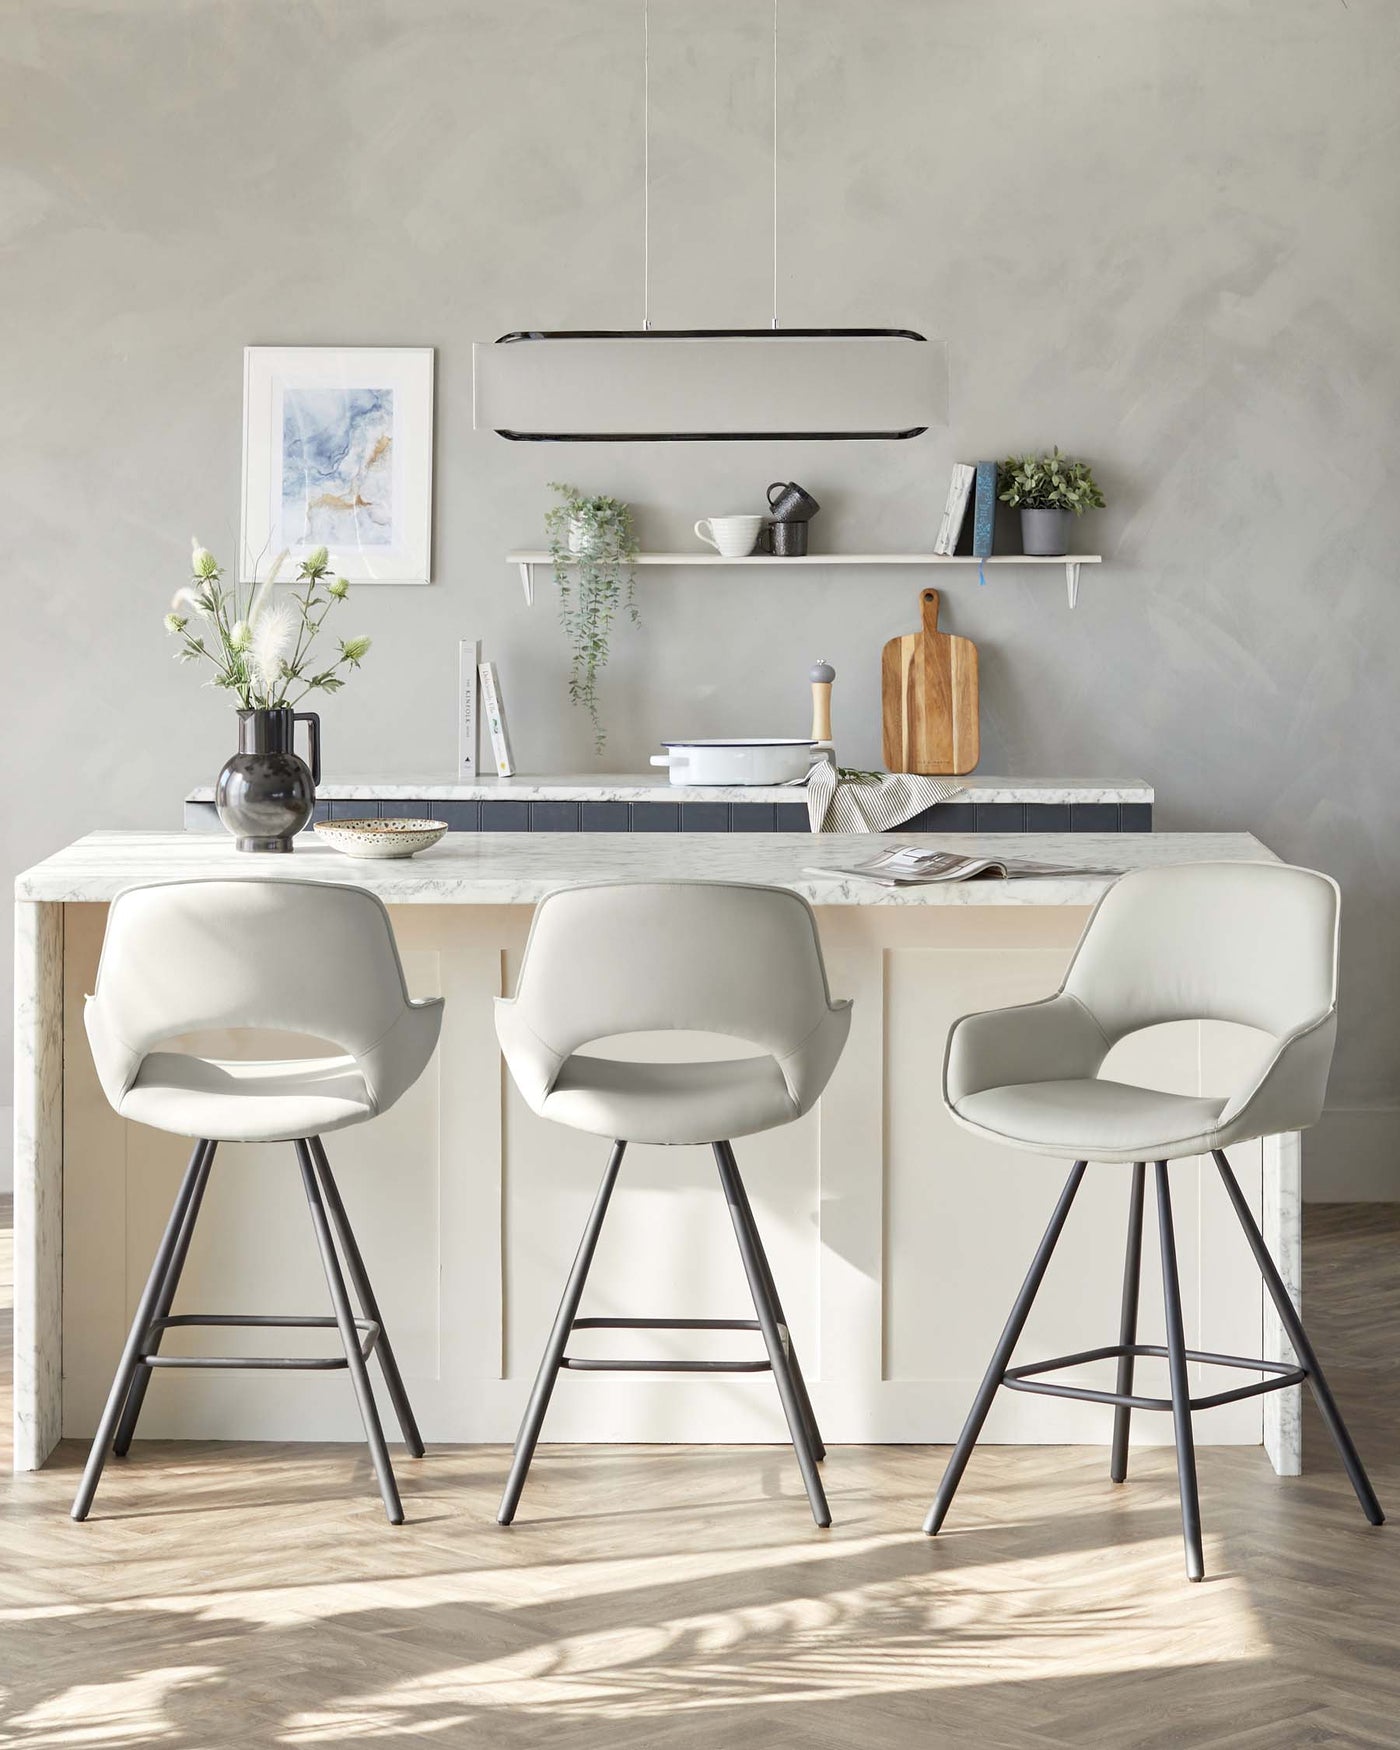 Three modern bar stools with beige upholstery and black metal legs positioned at a kitchen island with a marble countertop.